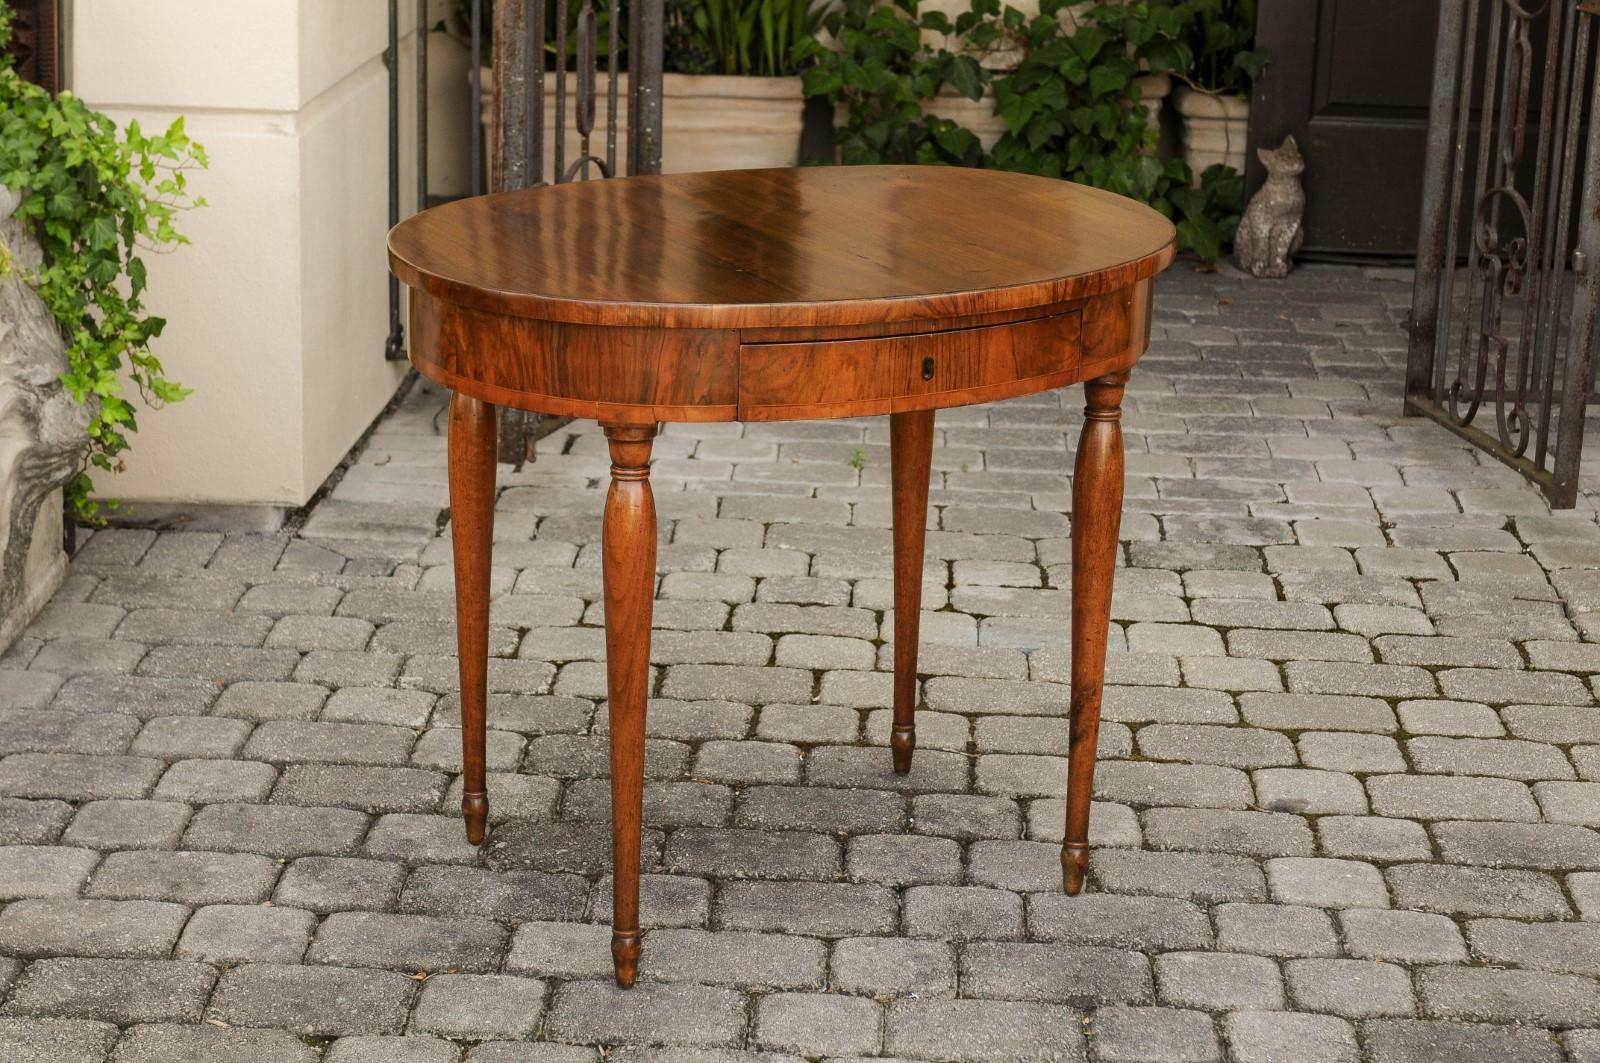 A French Napoleon III period oval walnut table from the mid-19th century, with single drawer and cylindrical tapering legs. Born in France during the second half of the 19th century, this elegant table features an oval top, sitting above an apron